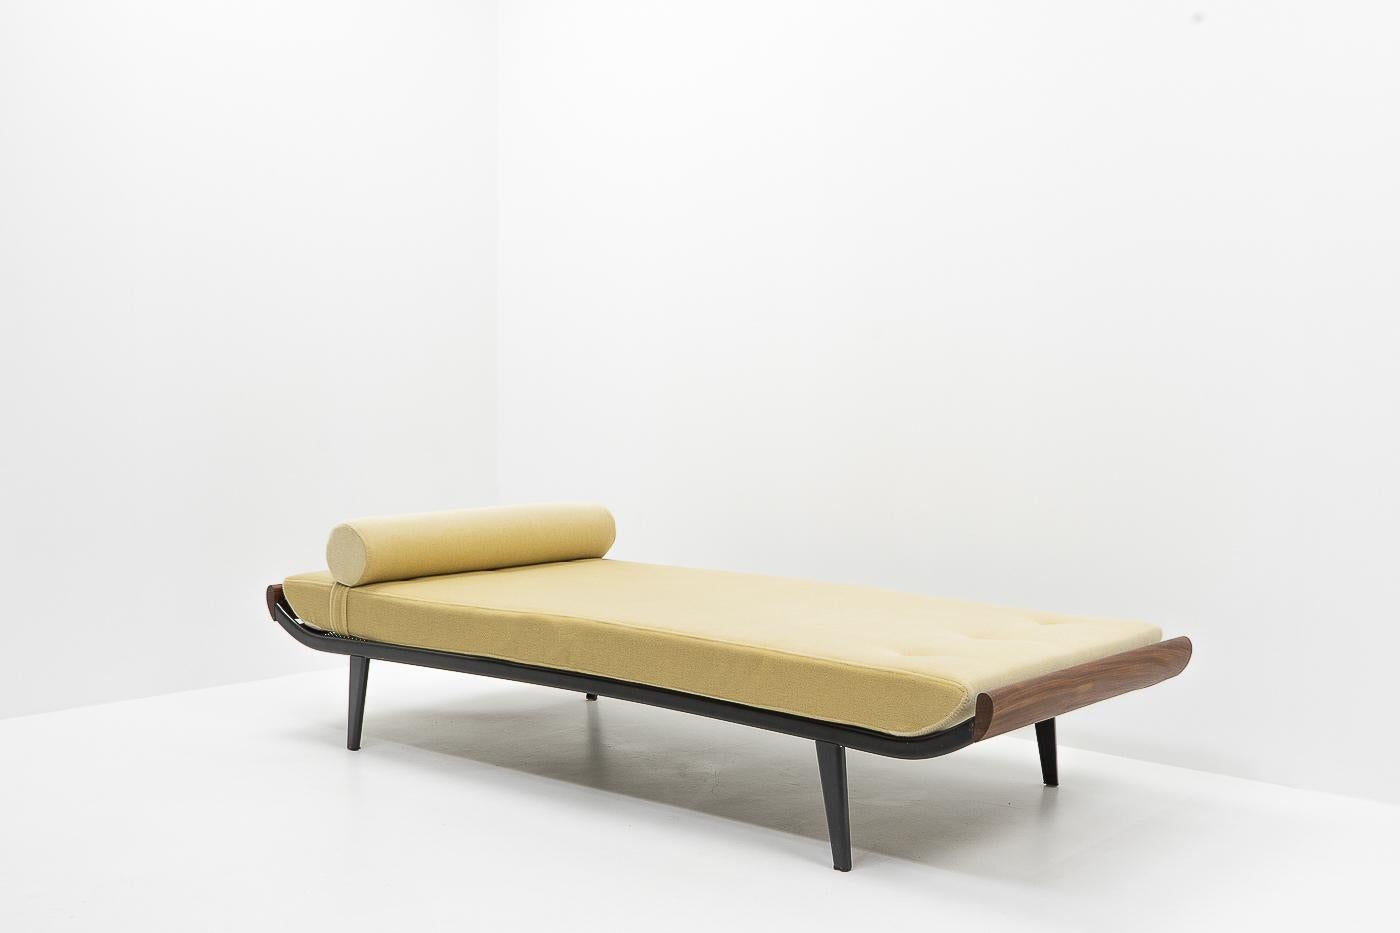 Vintage daybed designed by Dick Cordemeijer for Auping (the Netherlands) during the 1950s.

New exclusive beige-colored natural mohair and foam; the daybed can be used as both a sofa and spare bed. The cover features a zipper on both pillow and